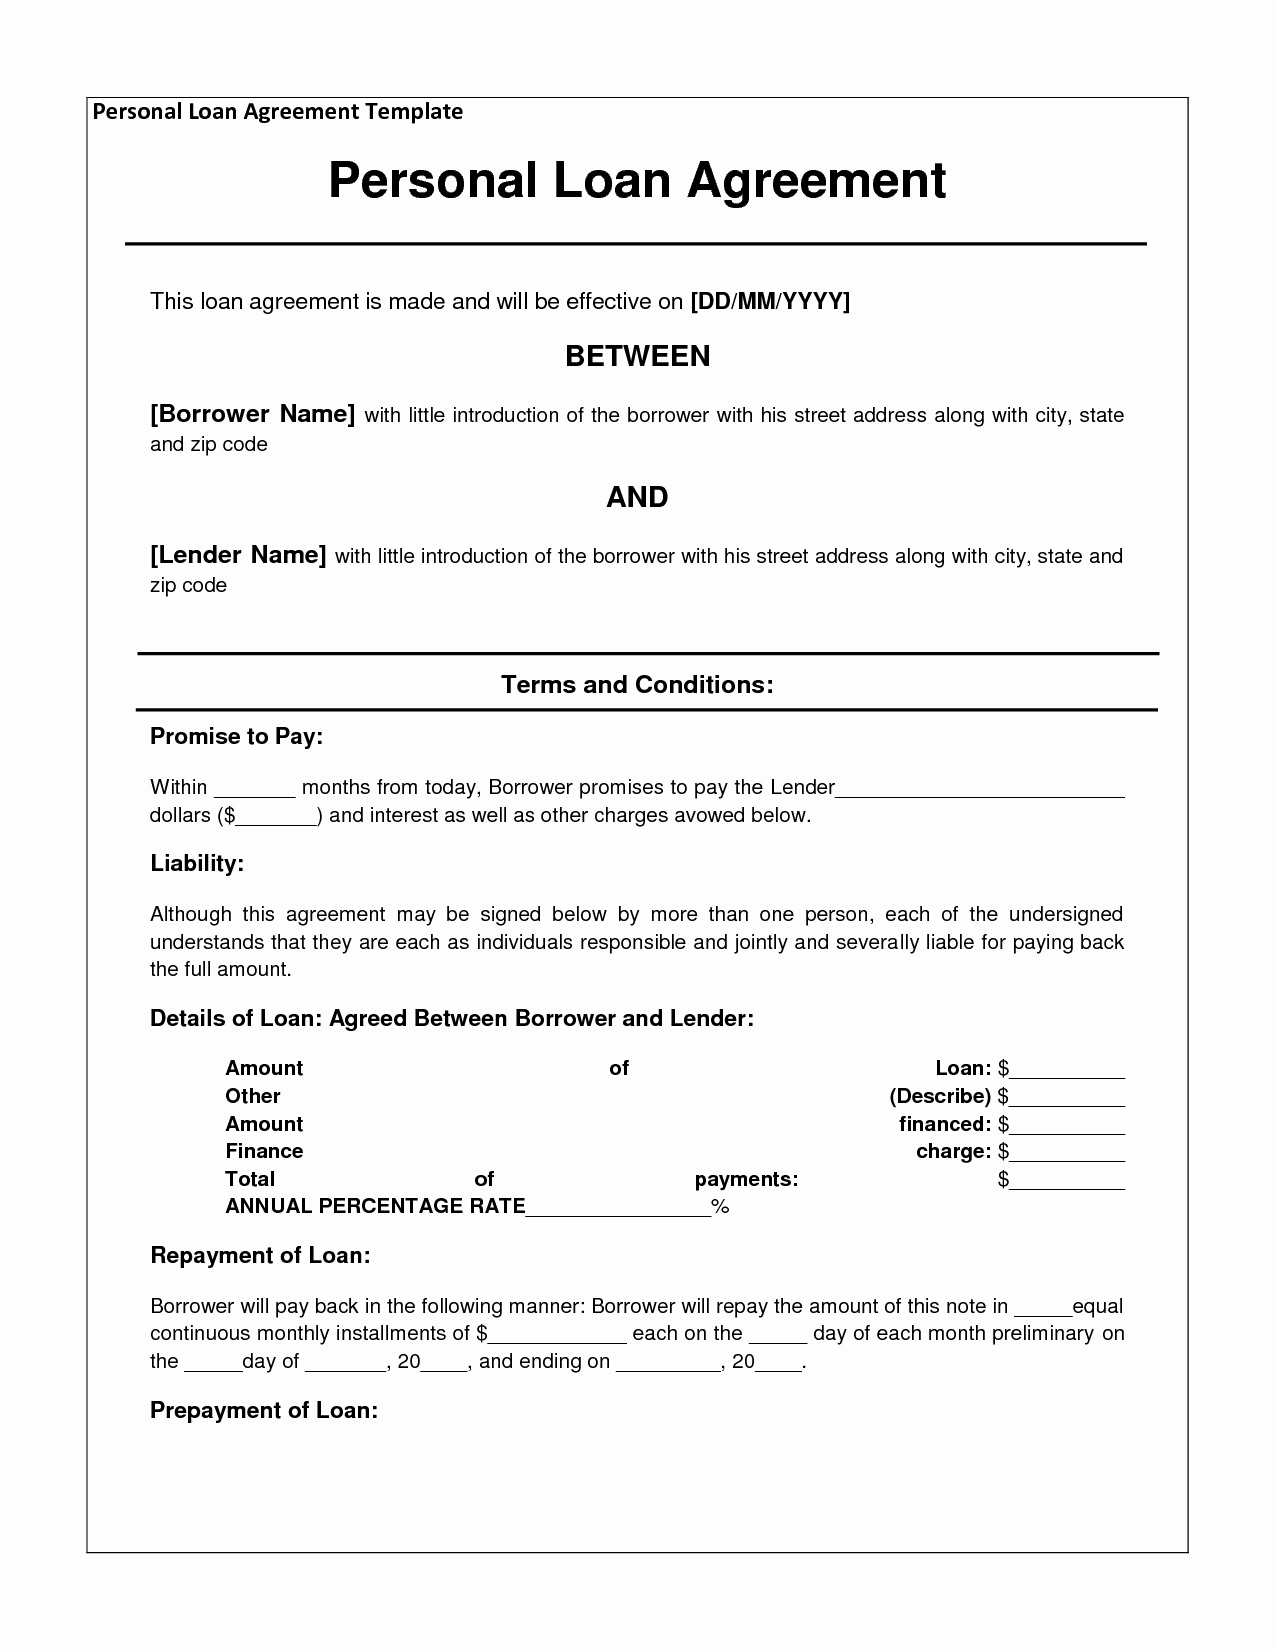 Personal Loan Contract Template Free Unique 14 Loan Agreement Templates Excel Pdf formats